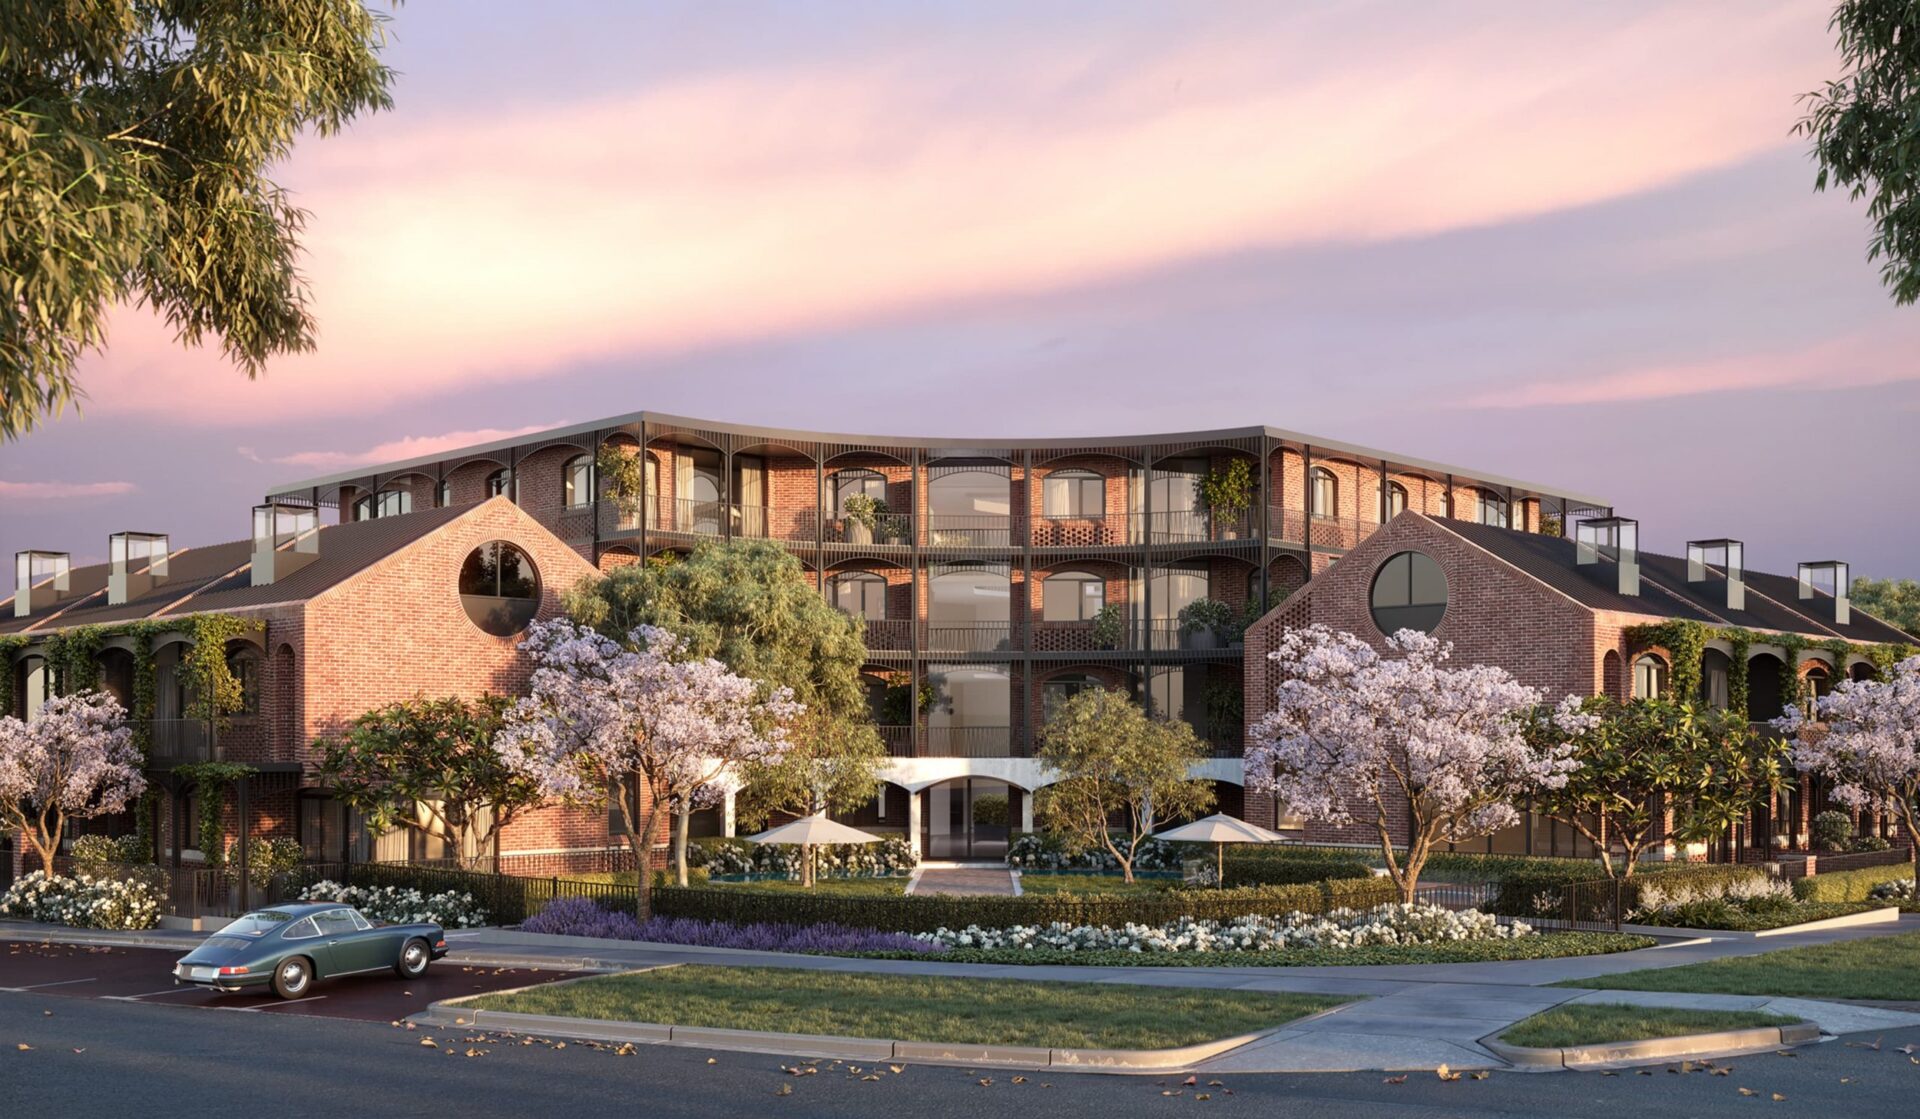 Exterior render of No. 7 Field St in Mt Lawley